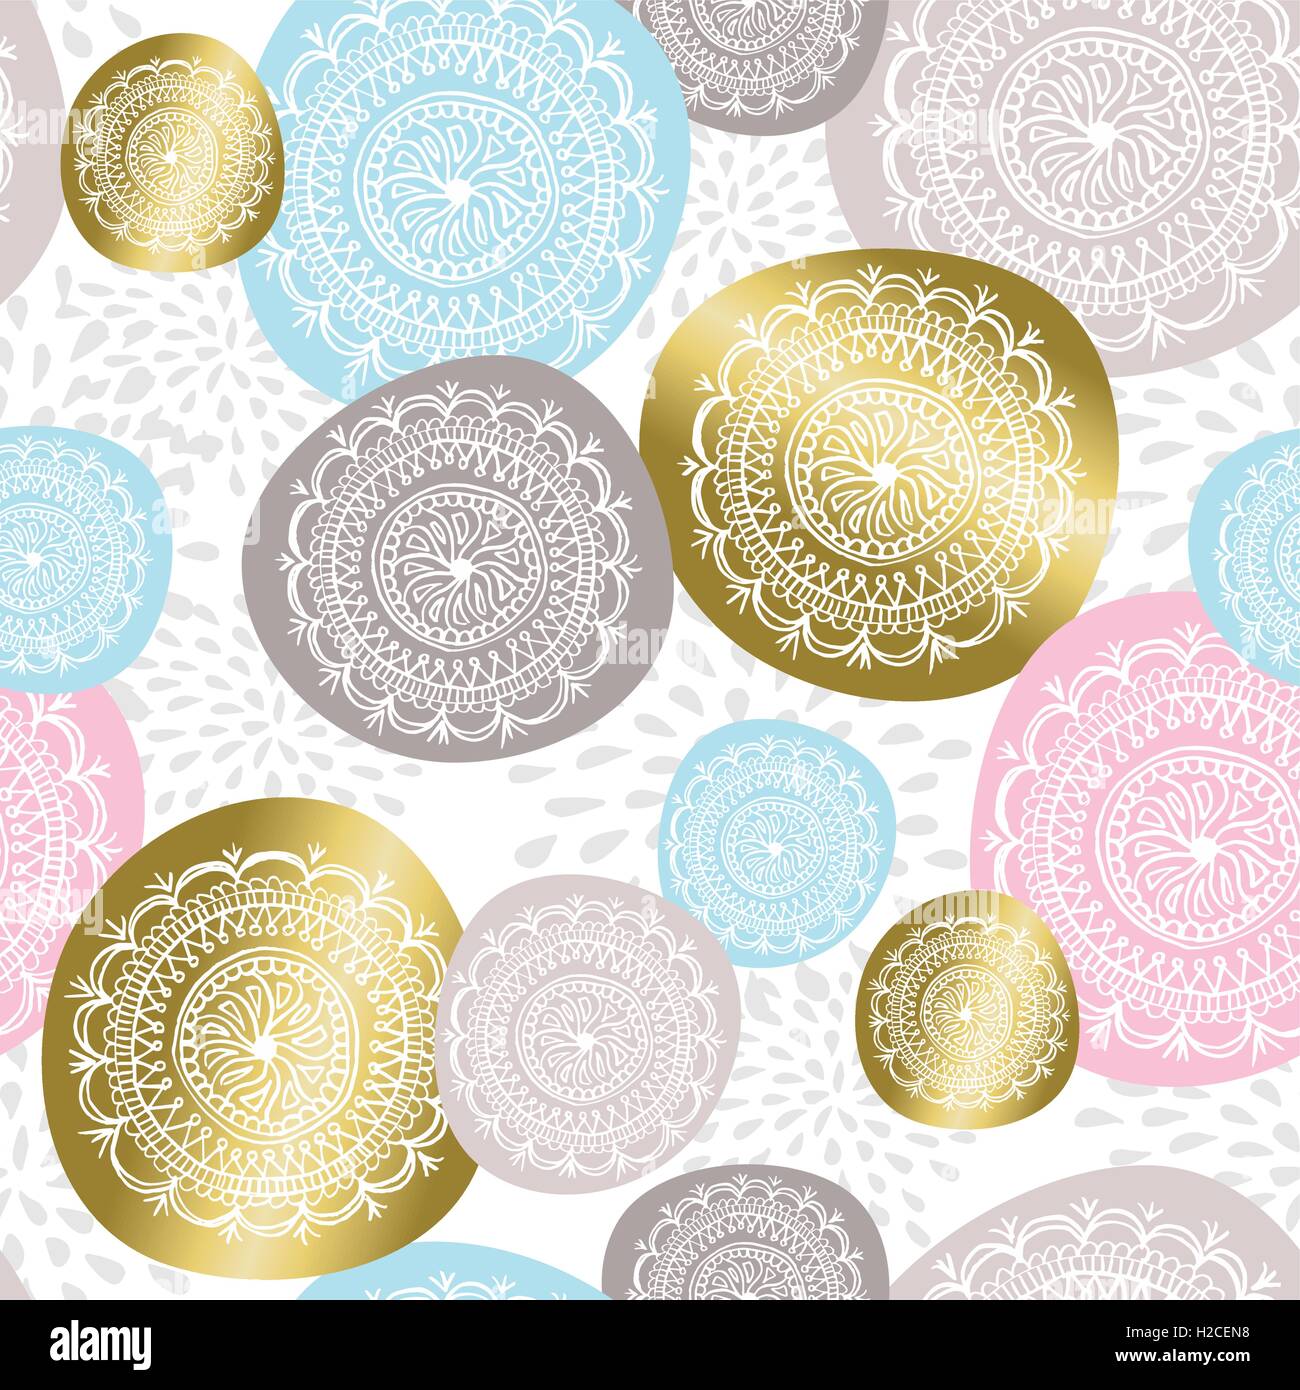 Christmas ornament seamless pattern in gold color with hand drawn flower mandala designs. EPS10 vector. Stock Vector